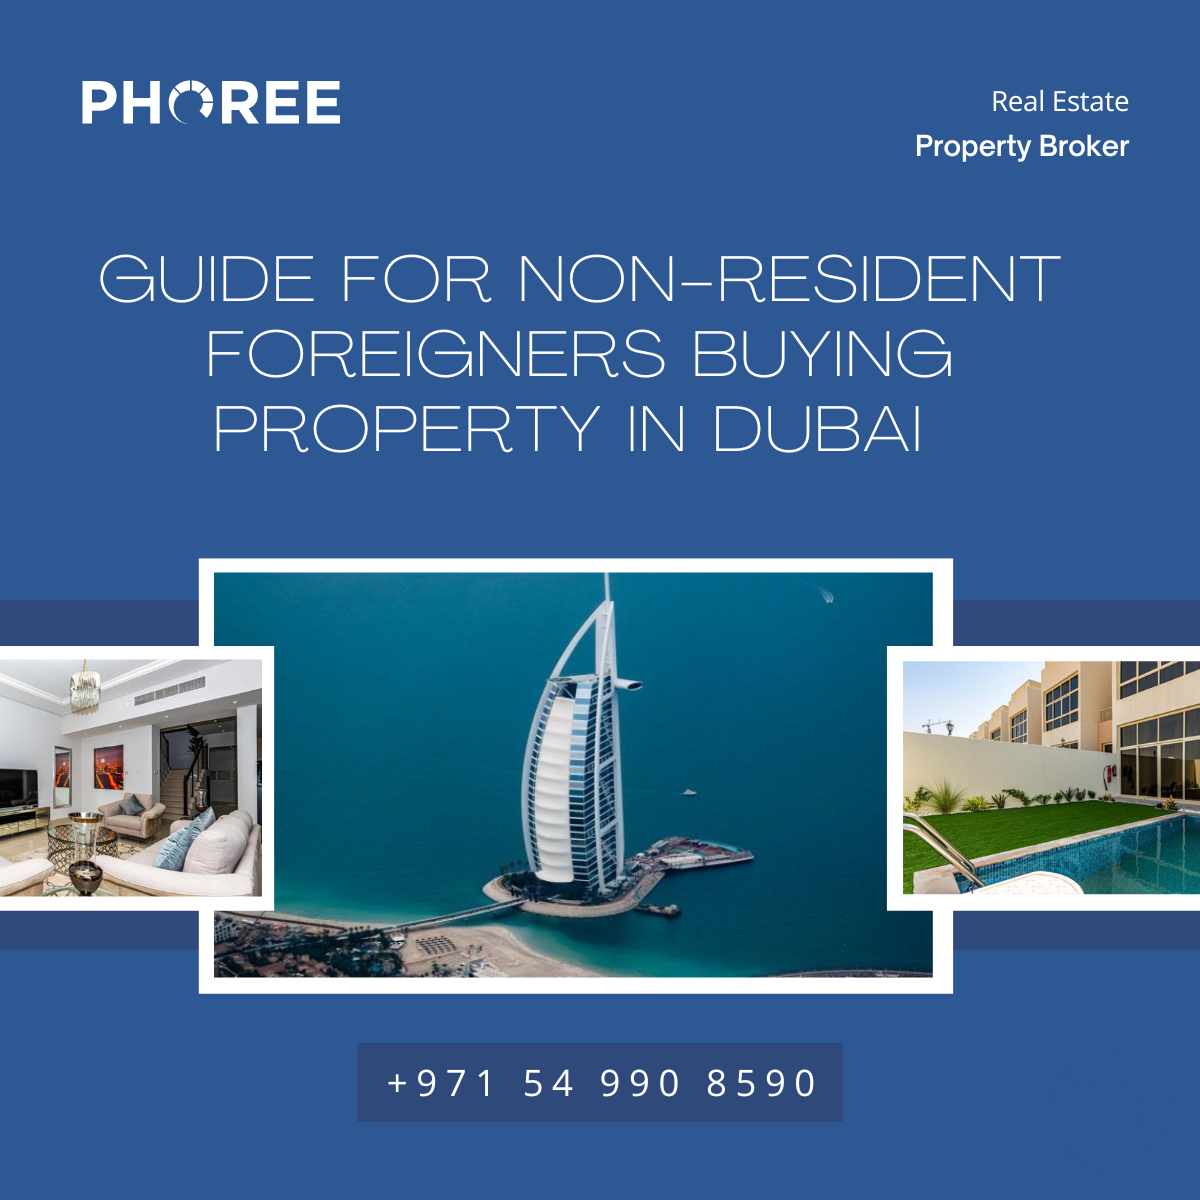 GUIDE FOR NON-RESIDENT FOREIGNERS BUYING PROPERTY IN DUBAI